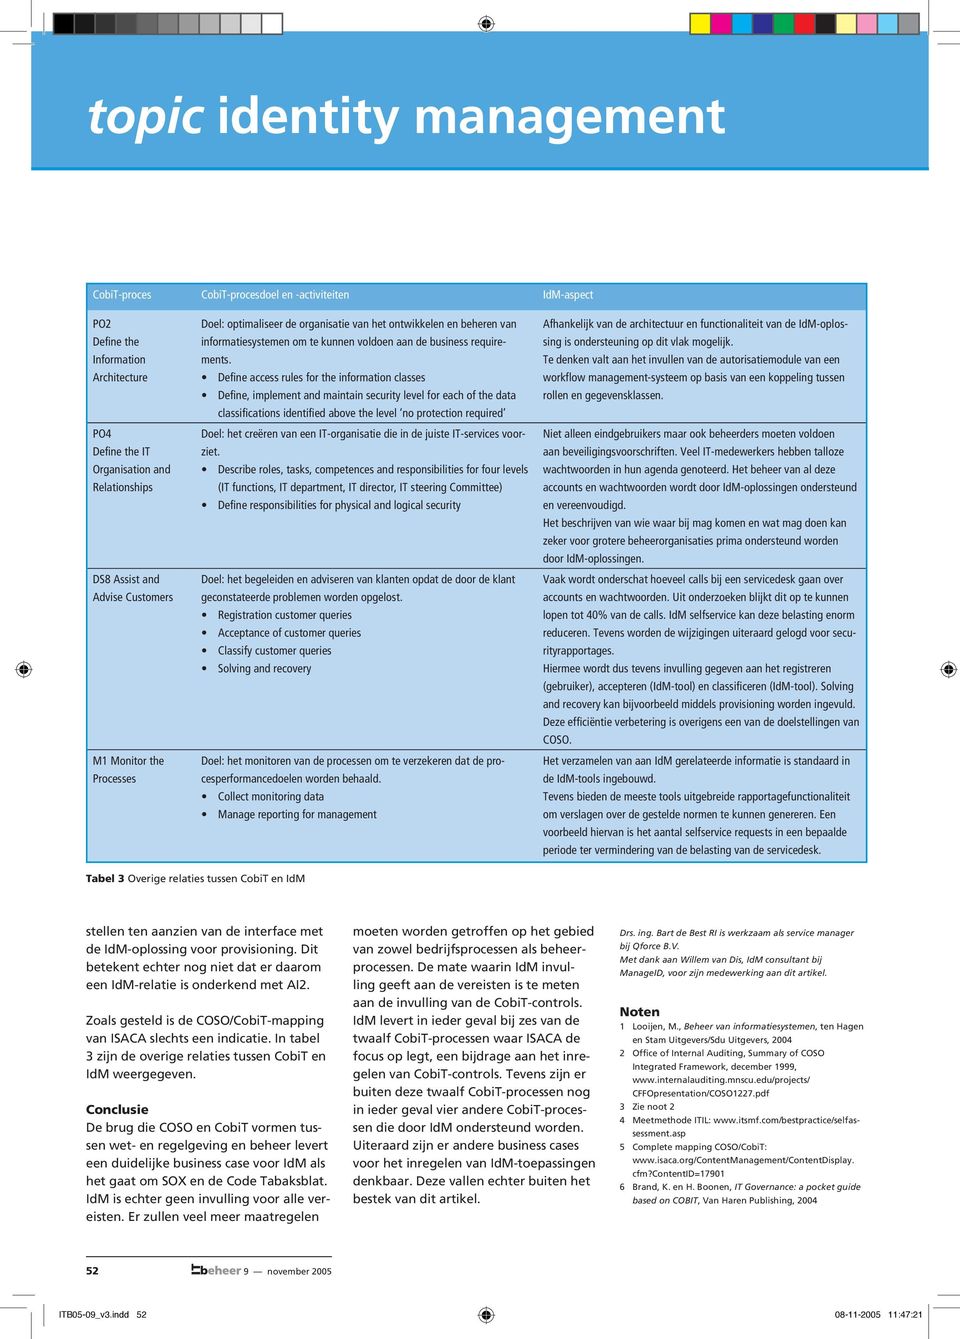 Define access rules for the information classes Define, implement and maintain security level for each of the data classifications identified above the level no protection required Doel: het creëren